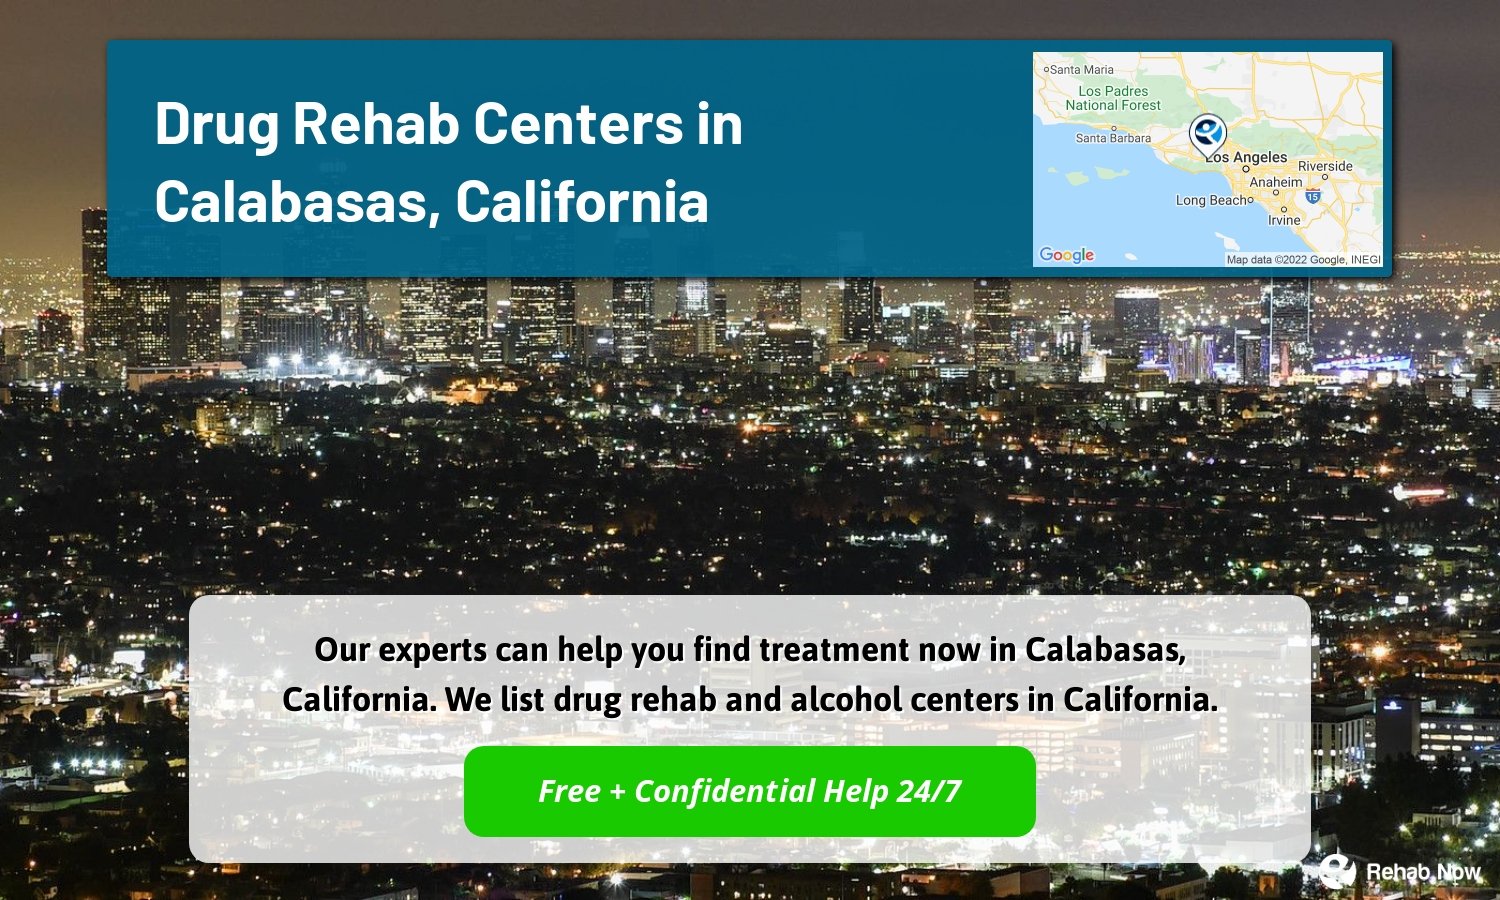 Our experts can help you find treatment now in Calabasas, California. We list drug rehab and alcohol centers in California.